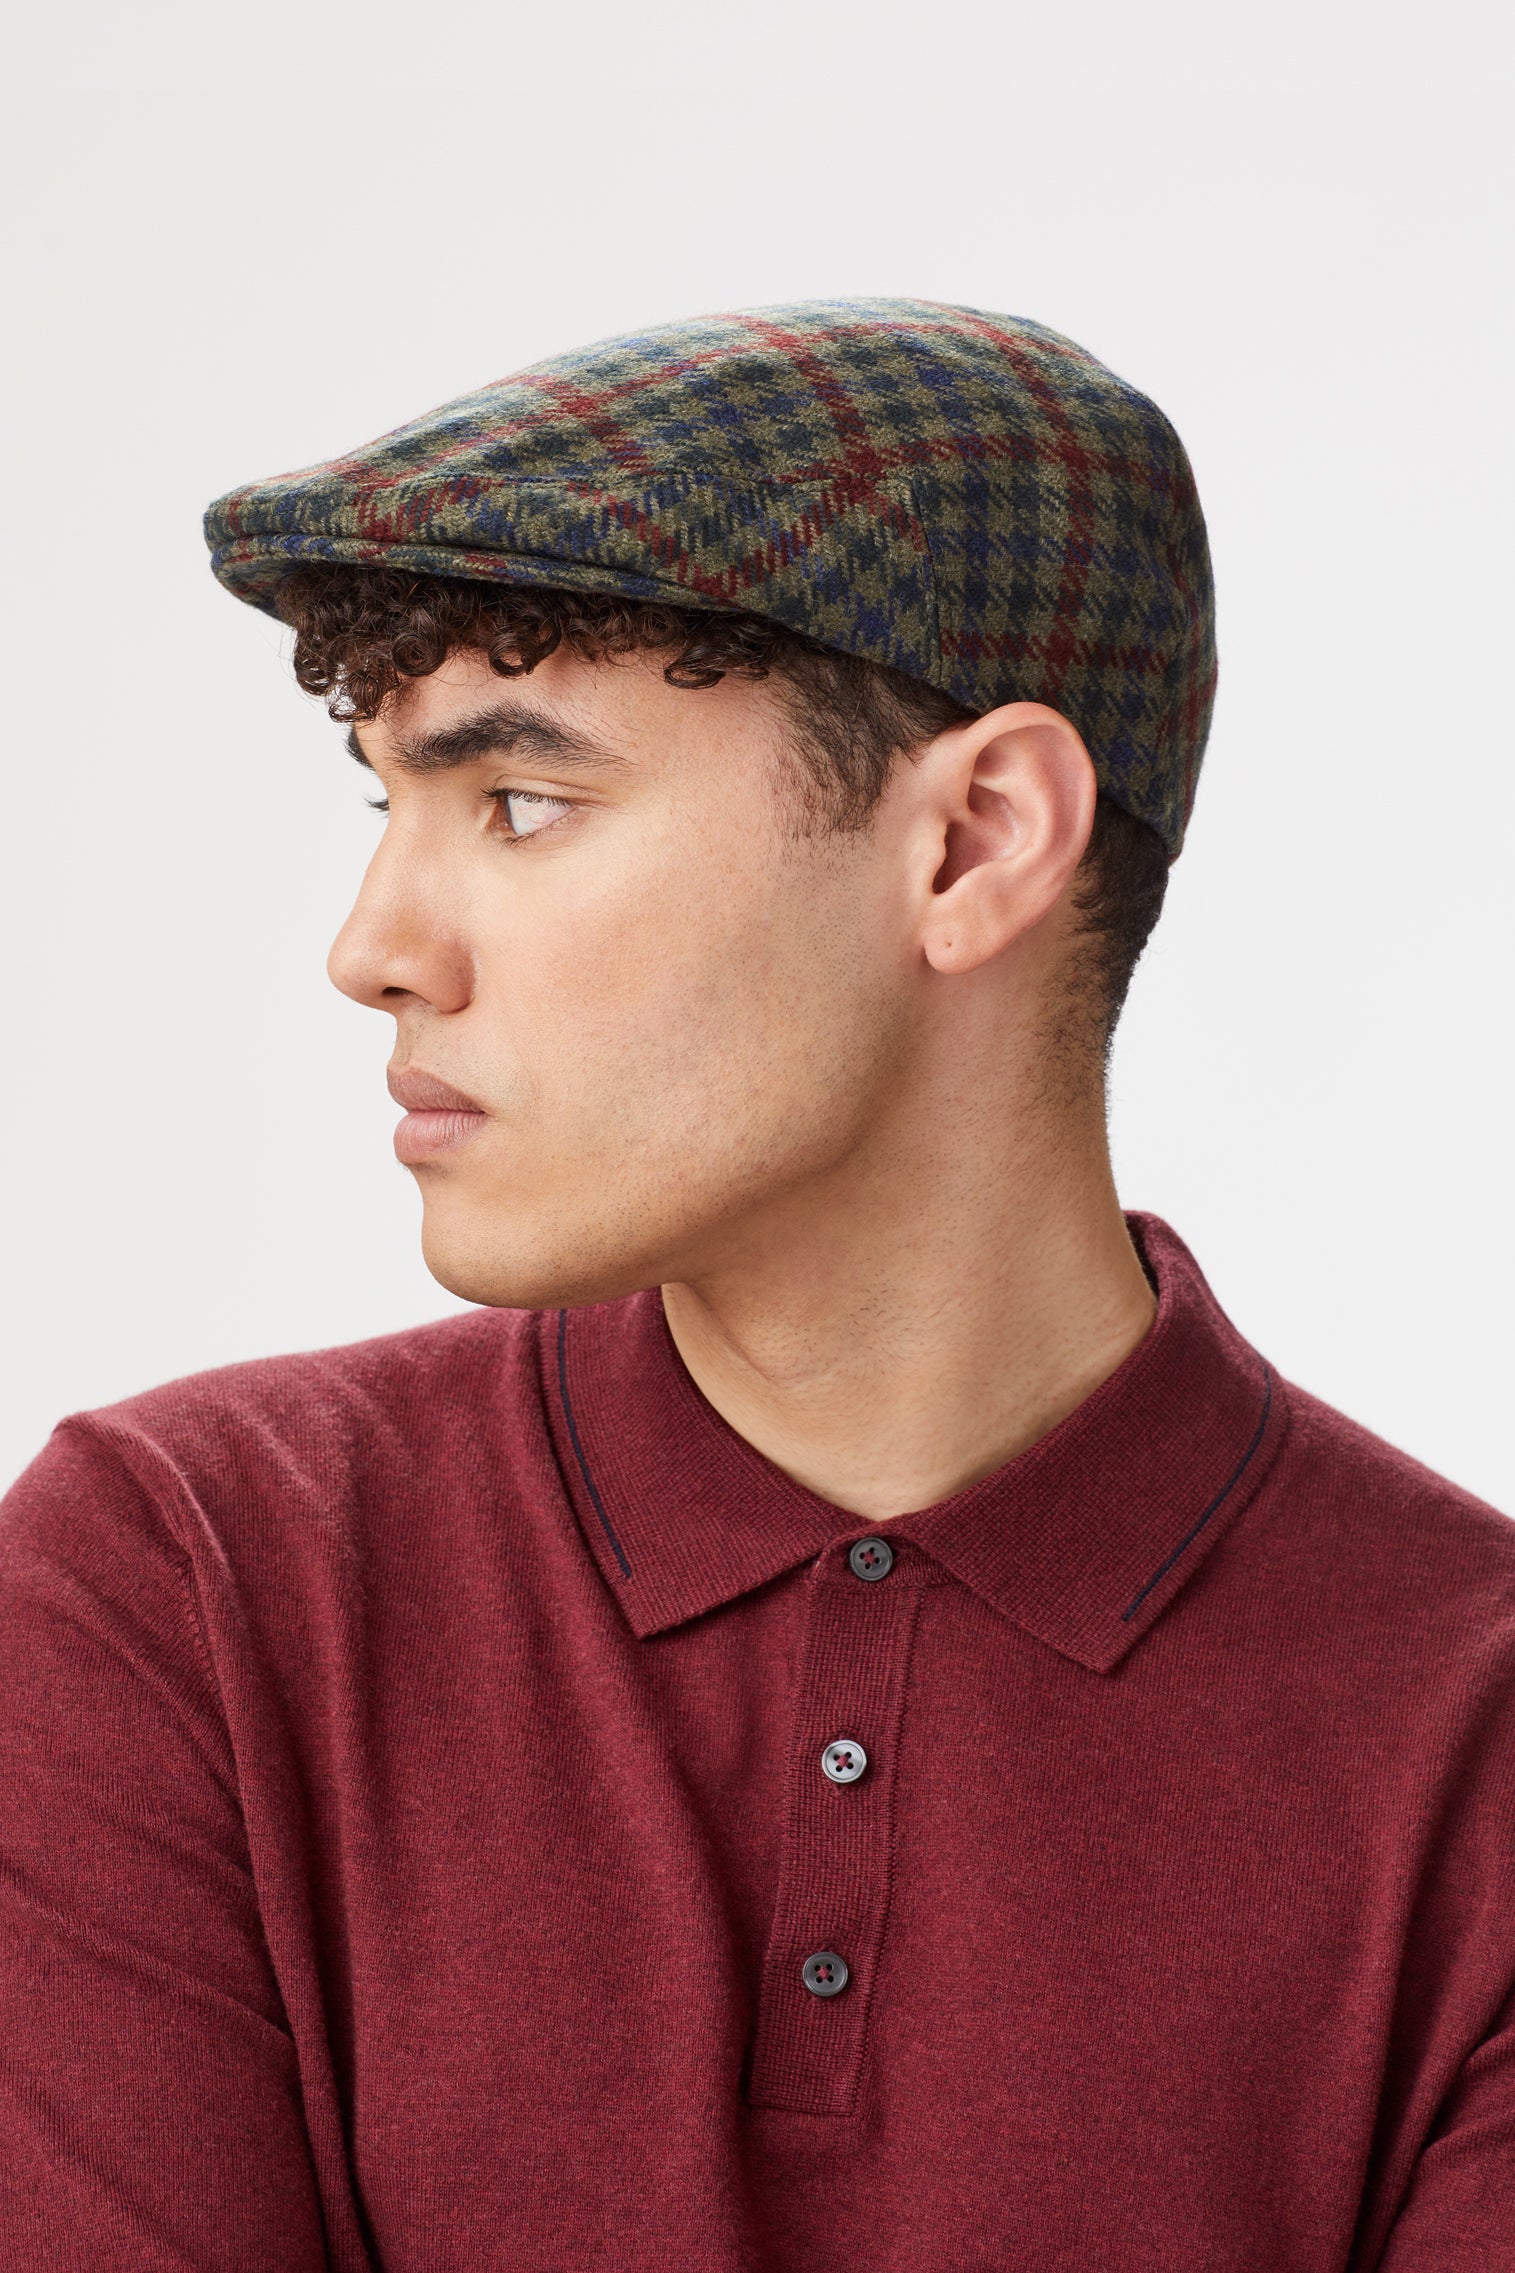 Gill Cashmere Flat Cap - Hats for Tall People - Lock & Co. Hatters London UK